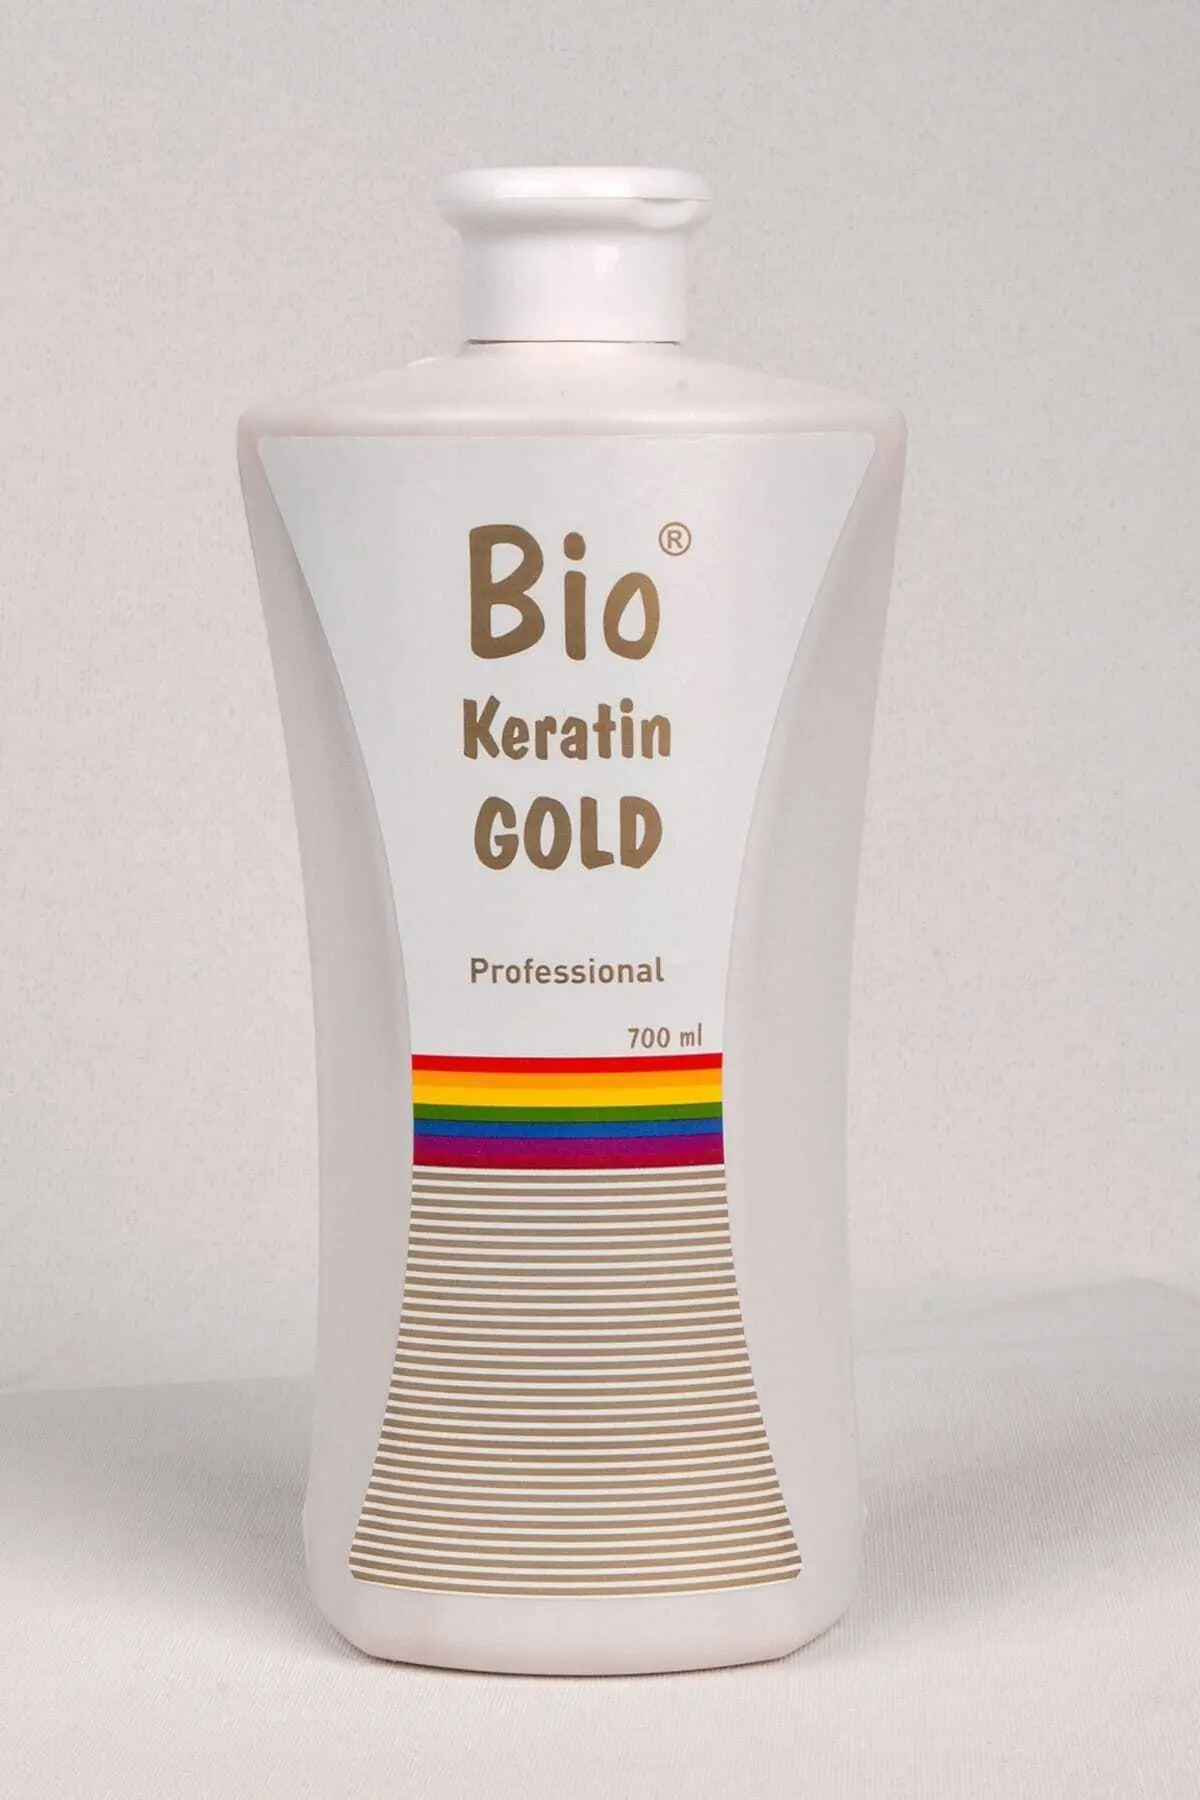 Bio keratin hair straightening 700 ml free shipping fast shipping, shipping fee is not Products